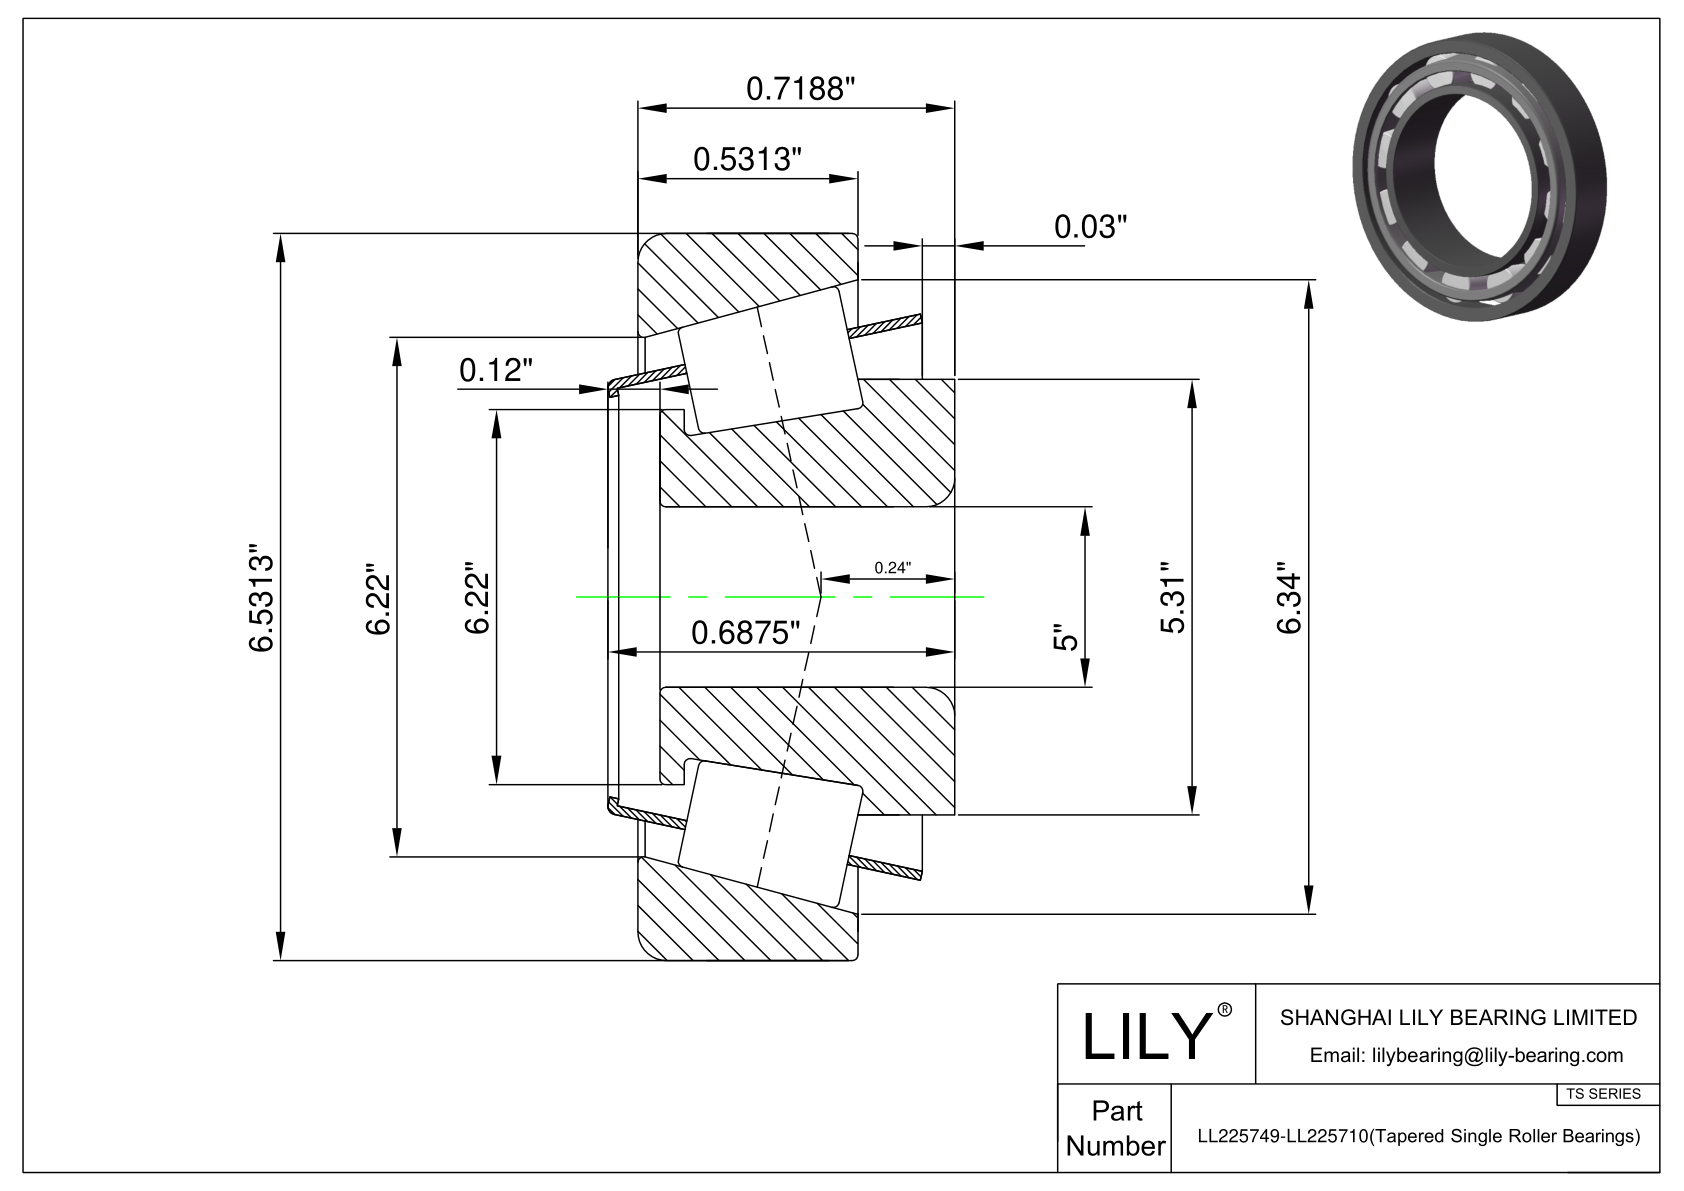 LL225749-LL225710 TS (Tapered Single Roller Bearings) (Imperial) cad drawing